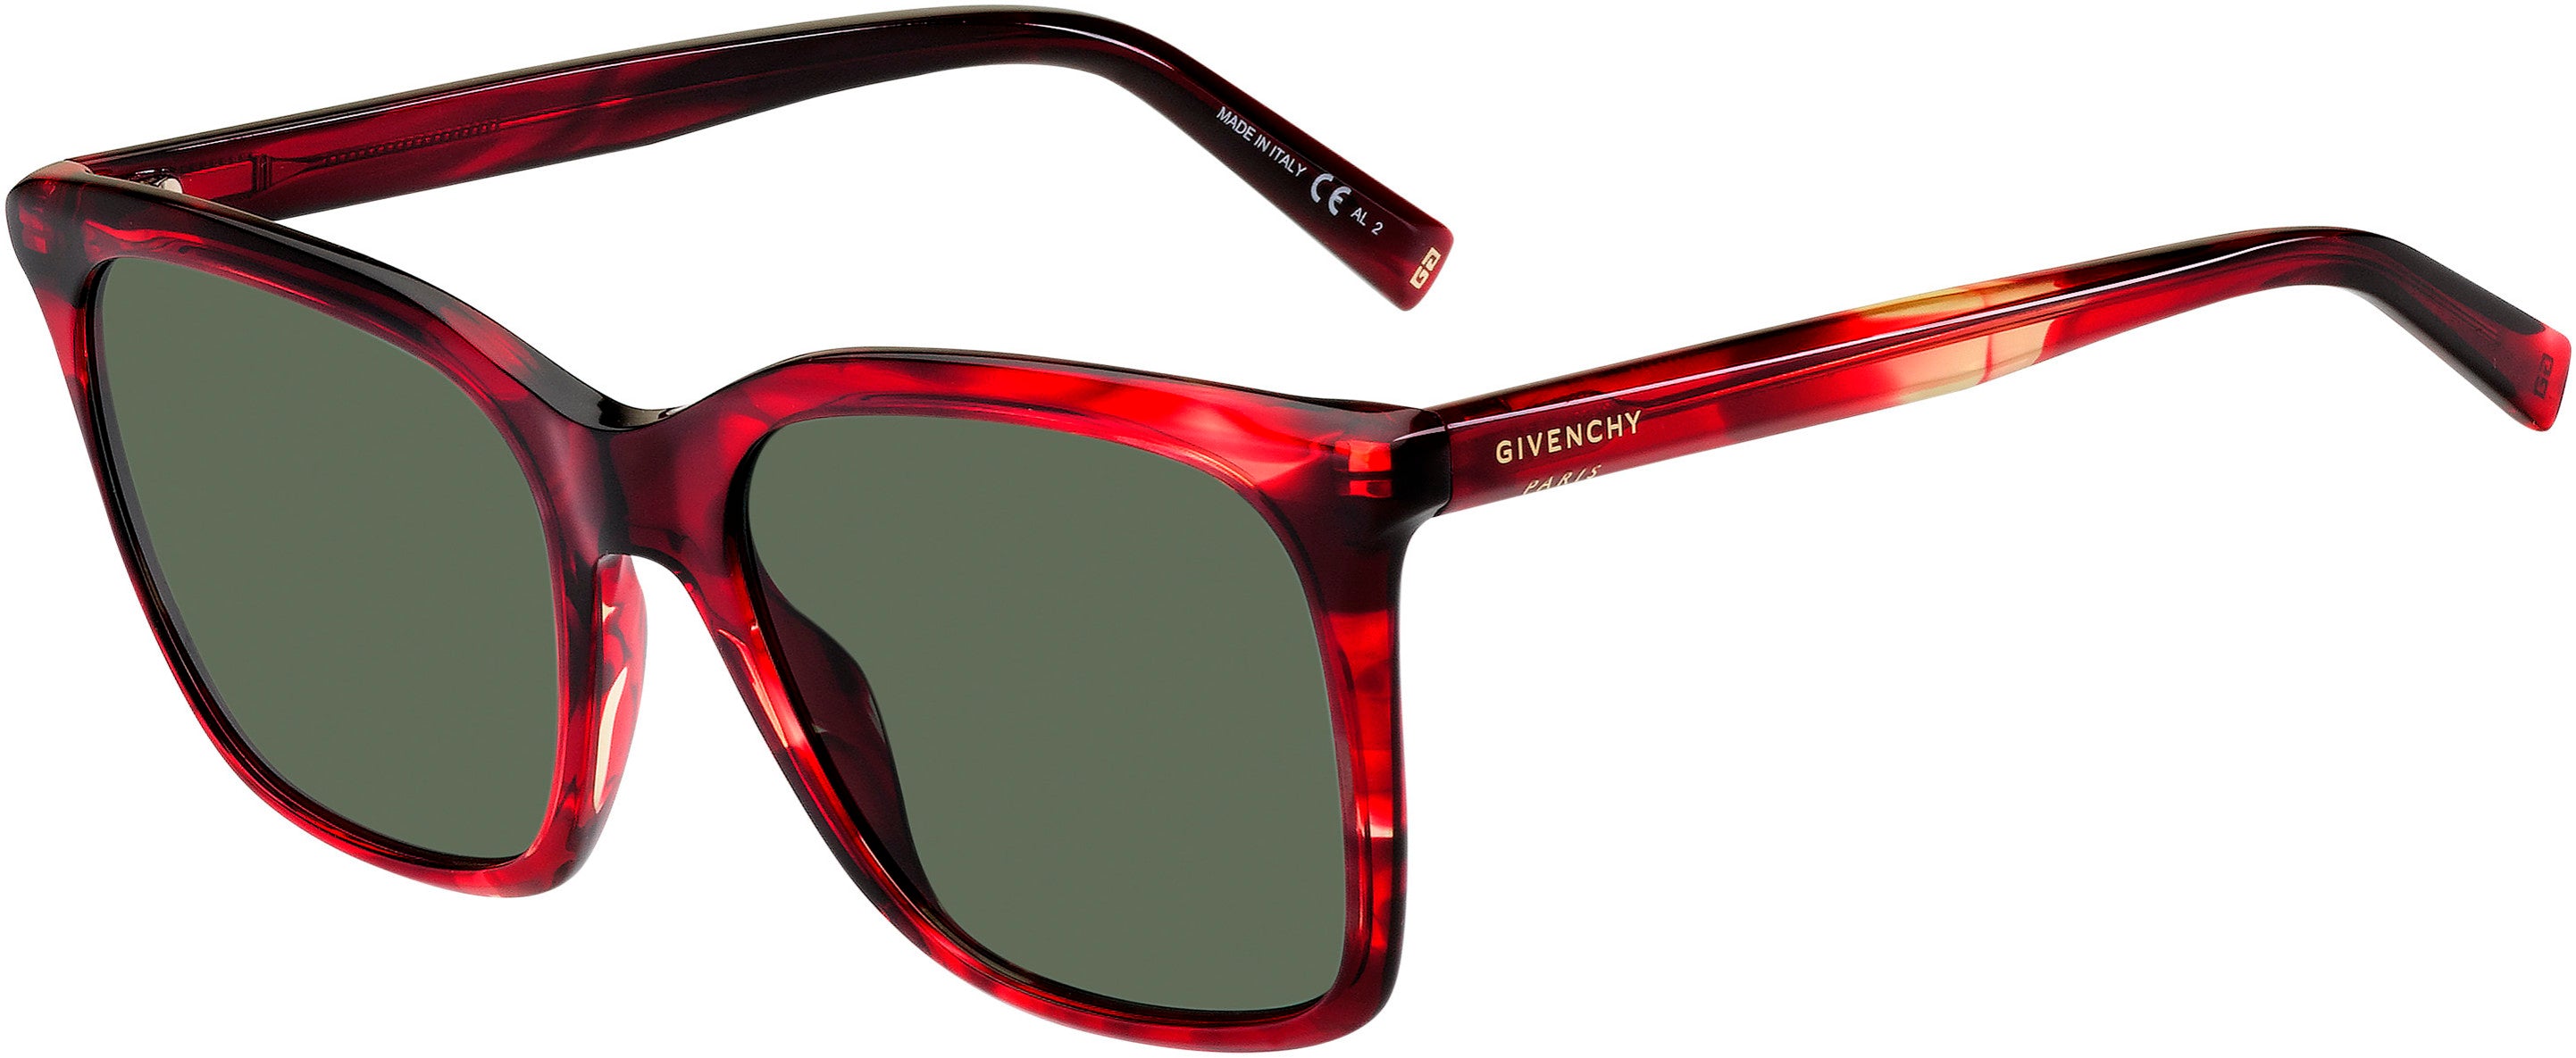  Givenchy 7199/S Square Sunglasses 0573-0573  Red Horn (QT Green)